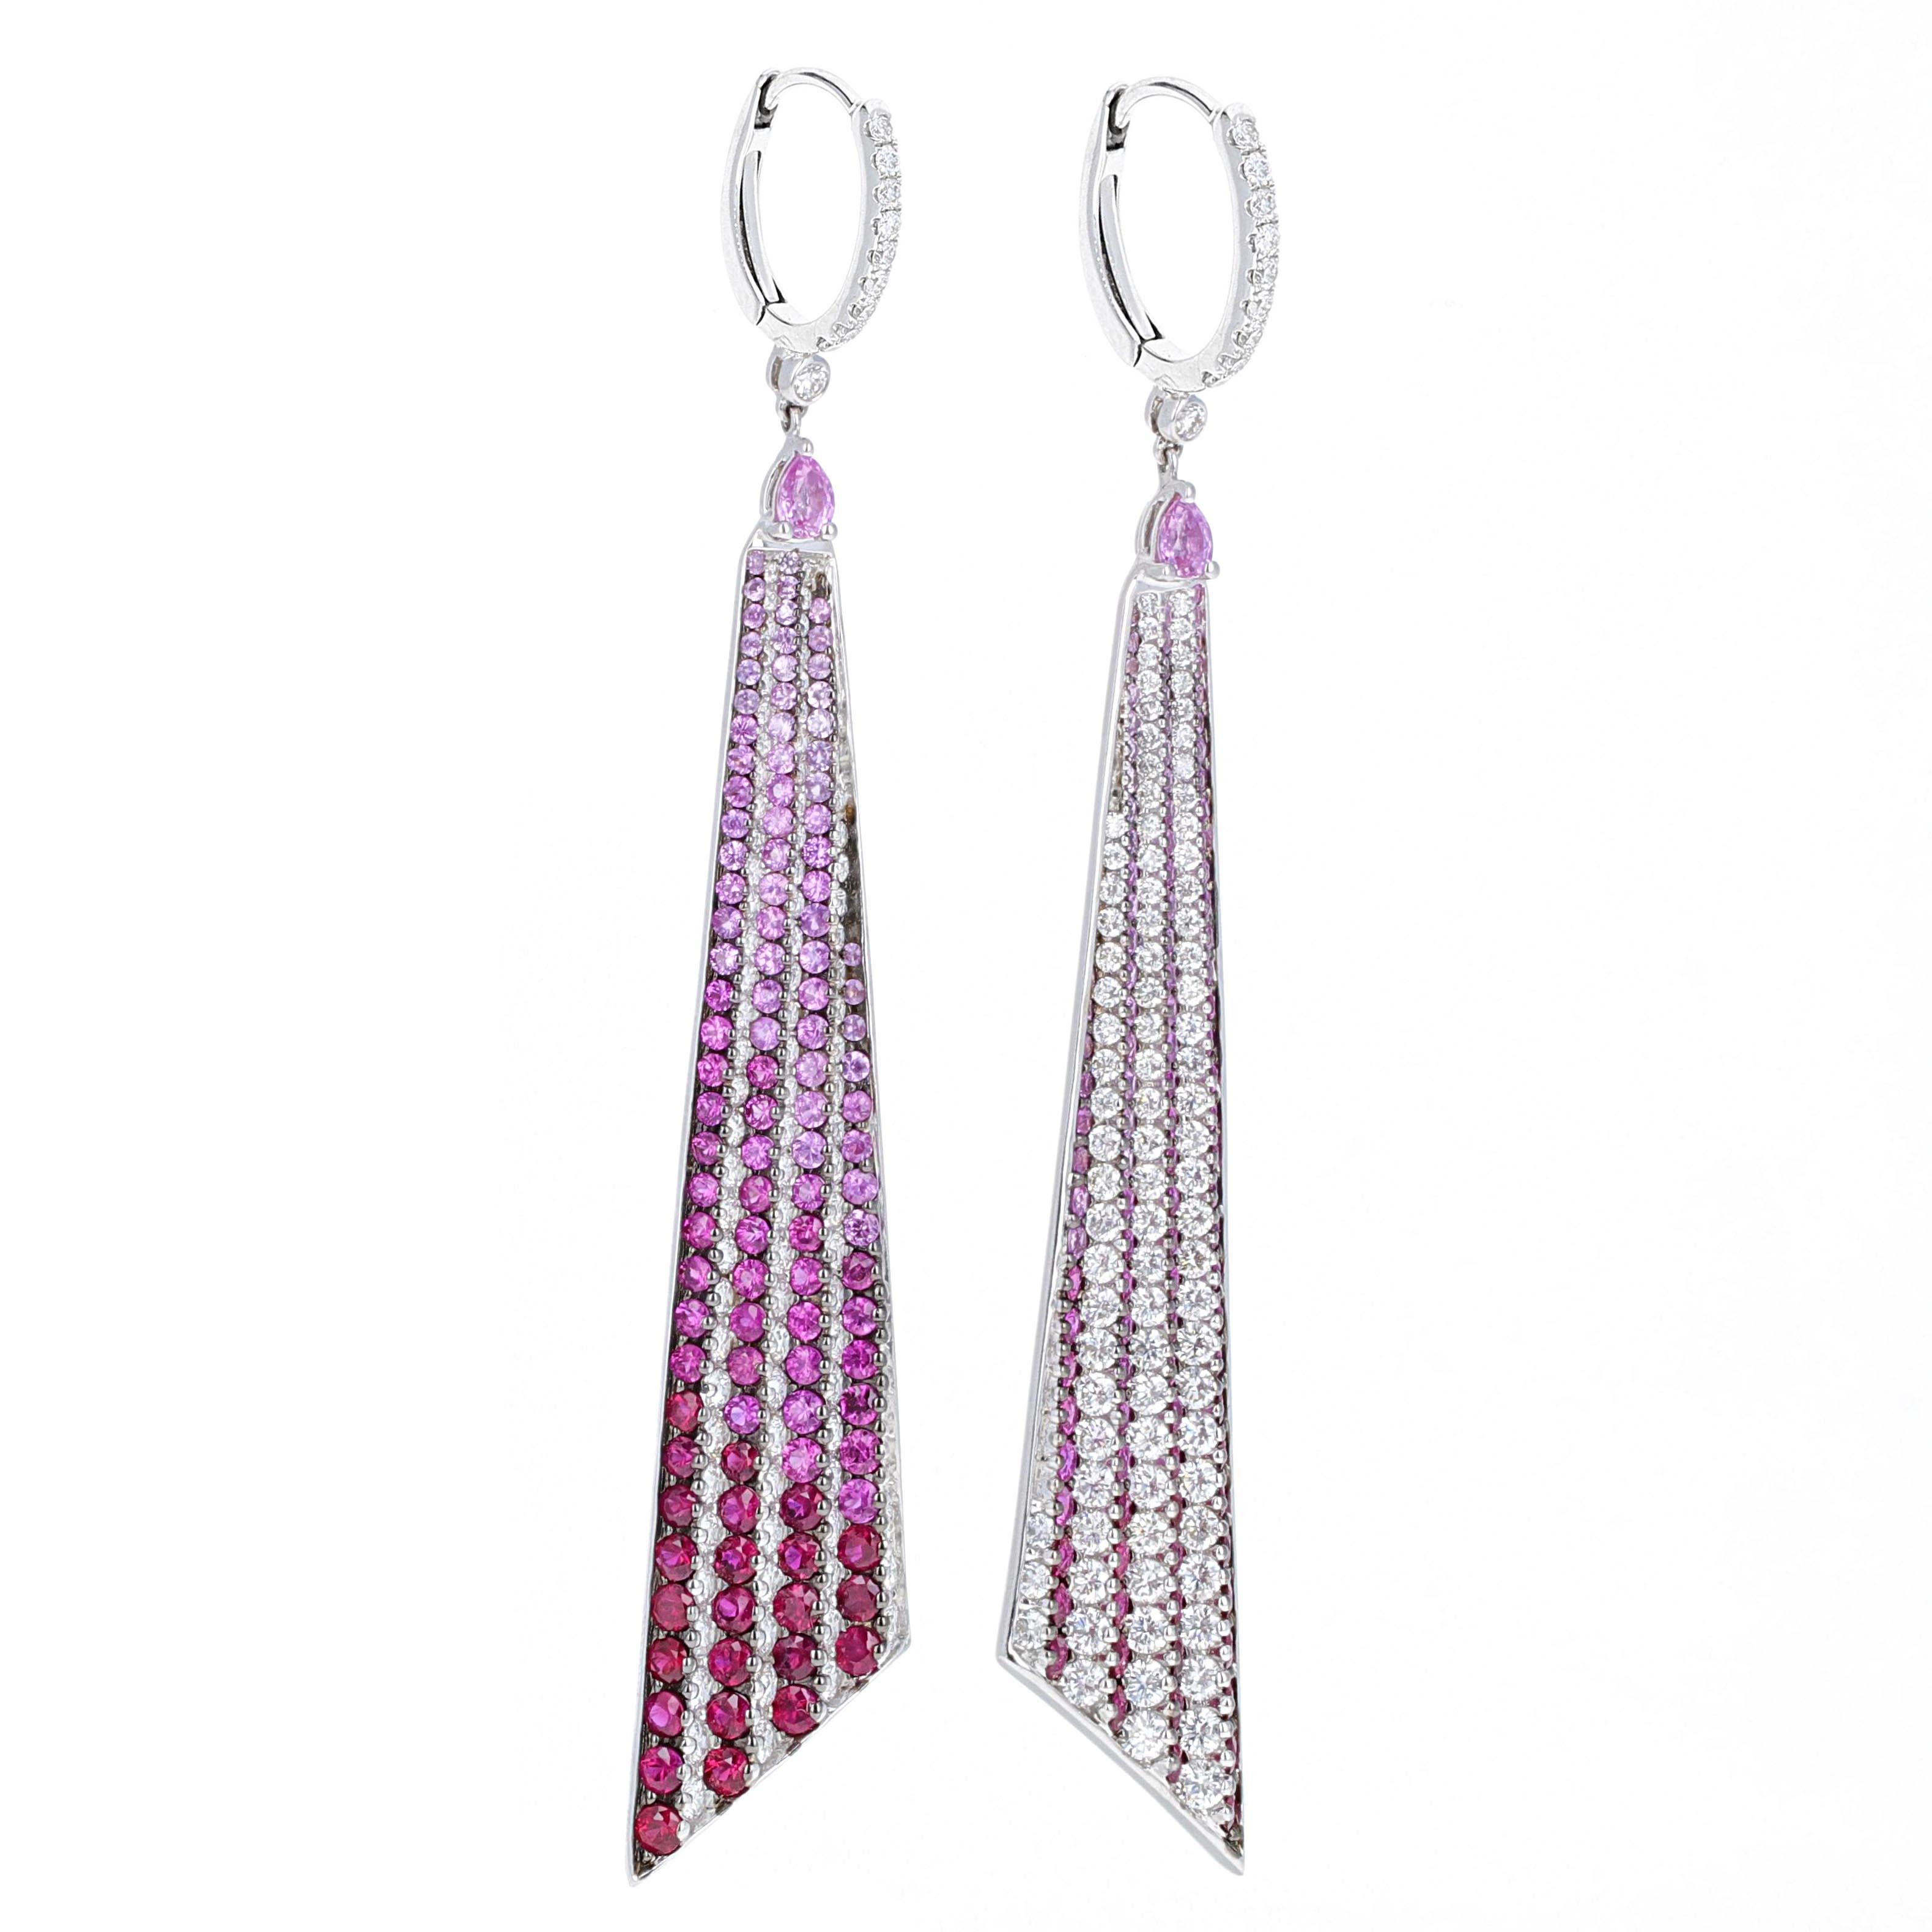 Color changing diamond, ruby and pink sapphire ombre' dangle earrings. They are one of a kind, fashion forward earrings. These earrings are a true show stopper. When you look at the earrings from different angels, the color changes from all white